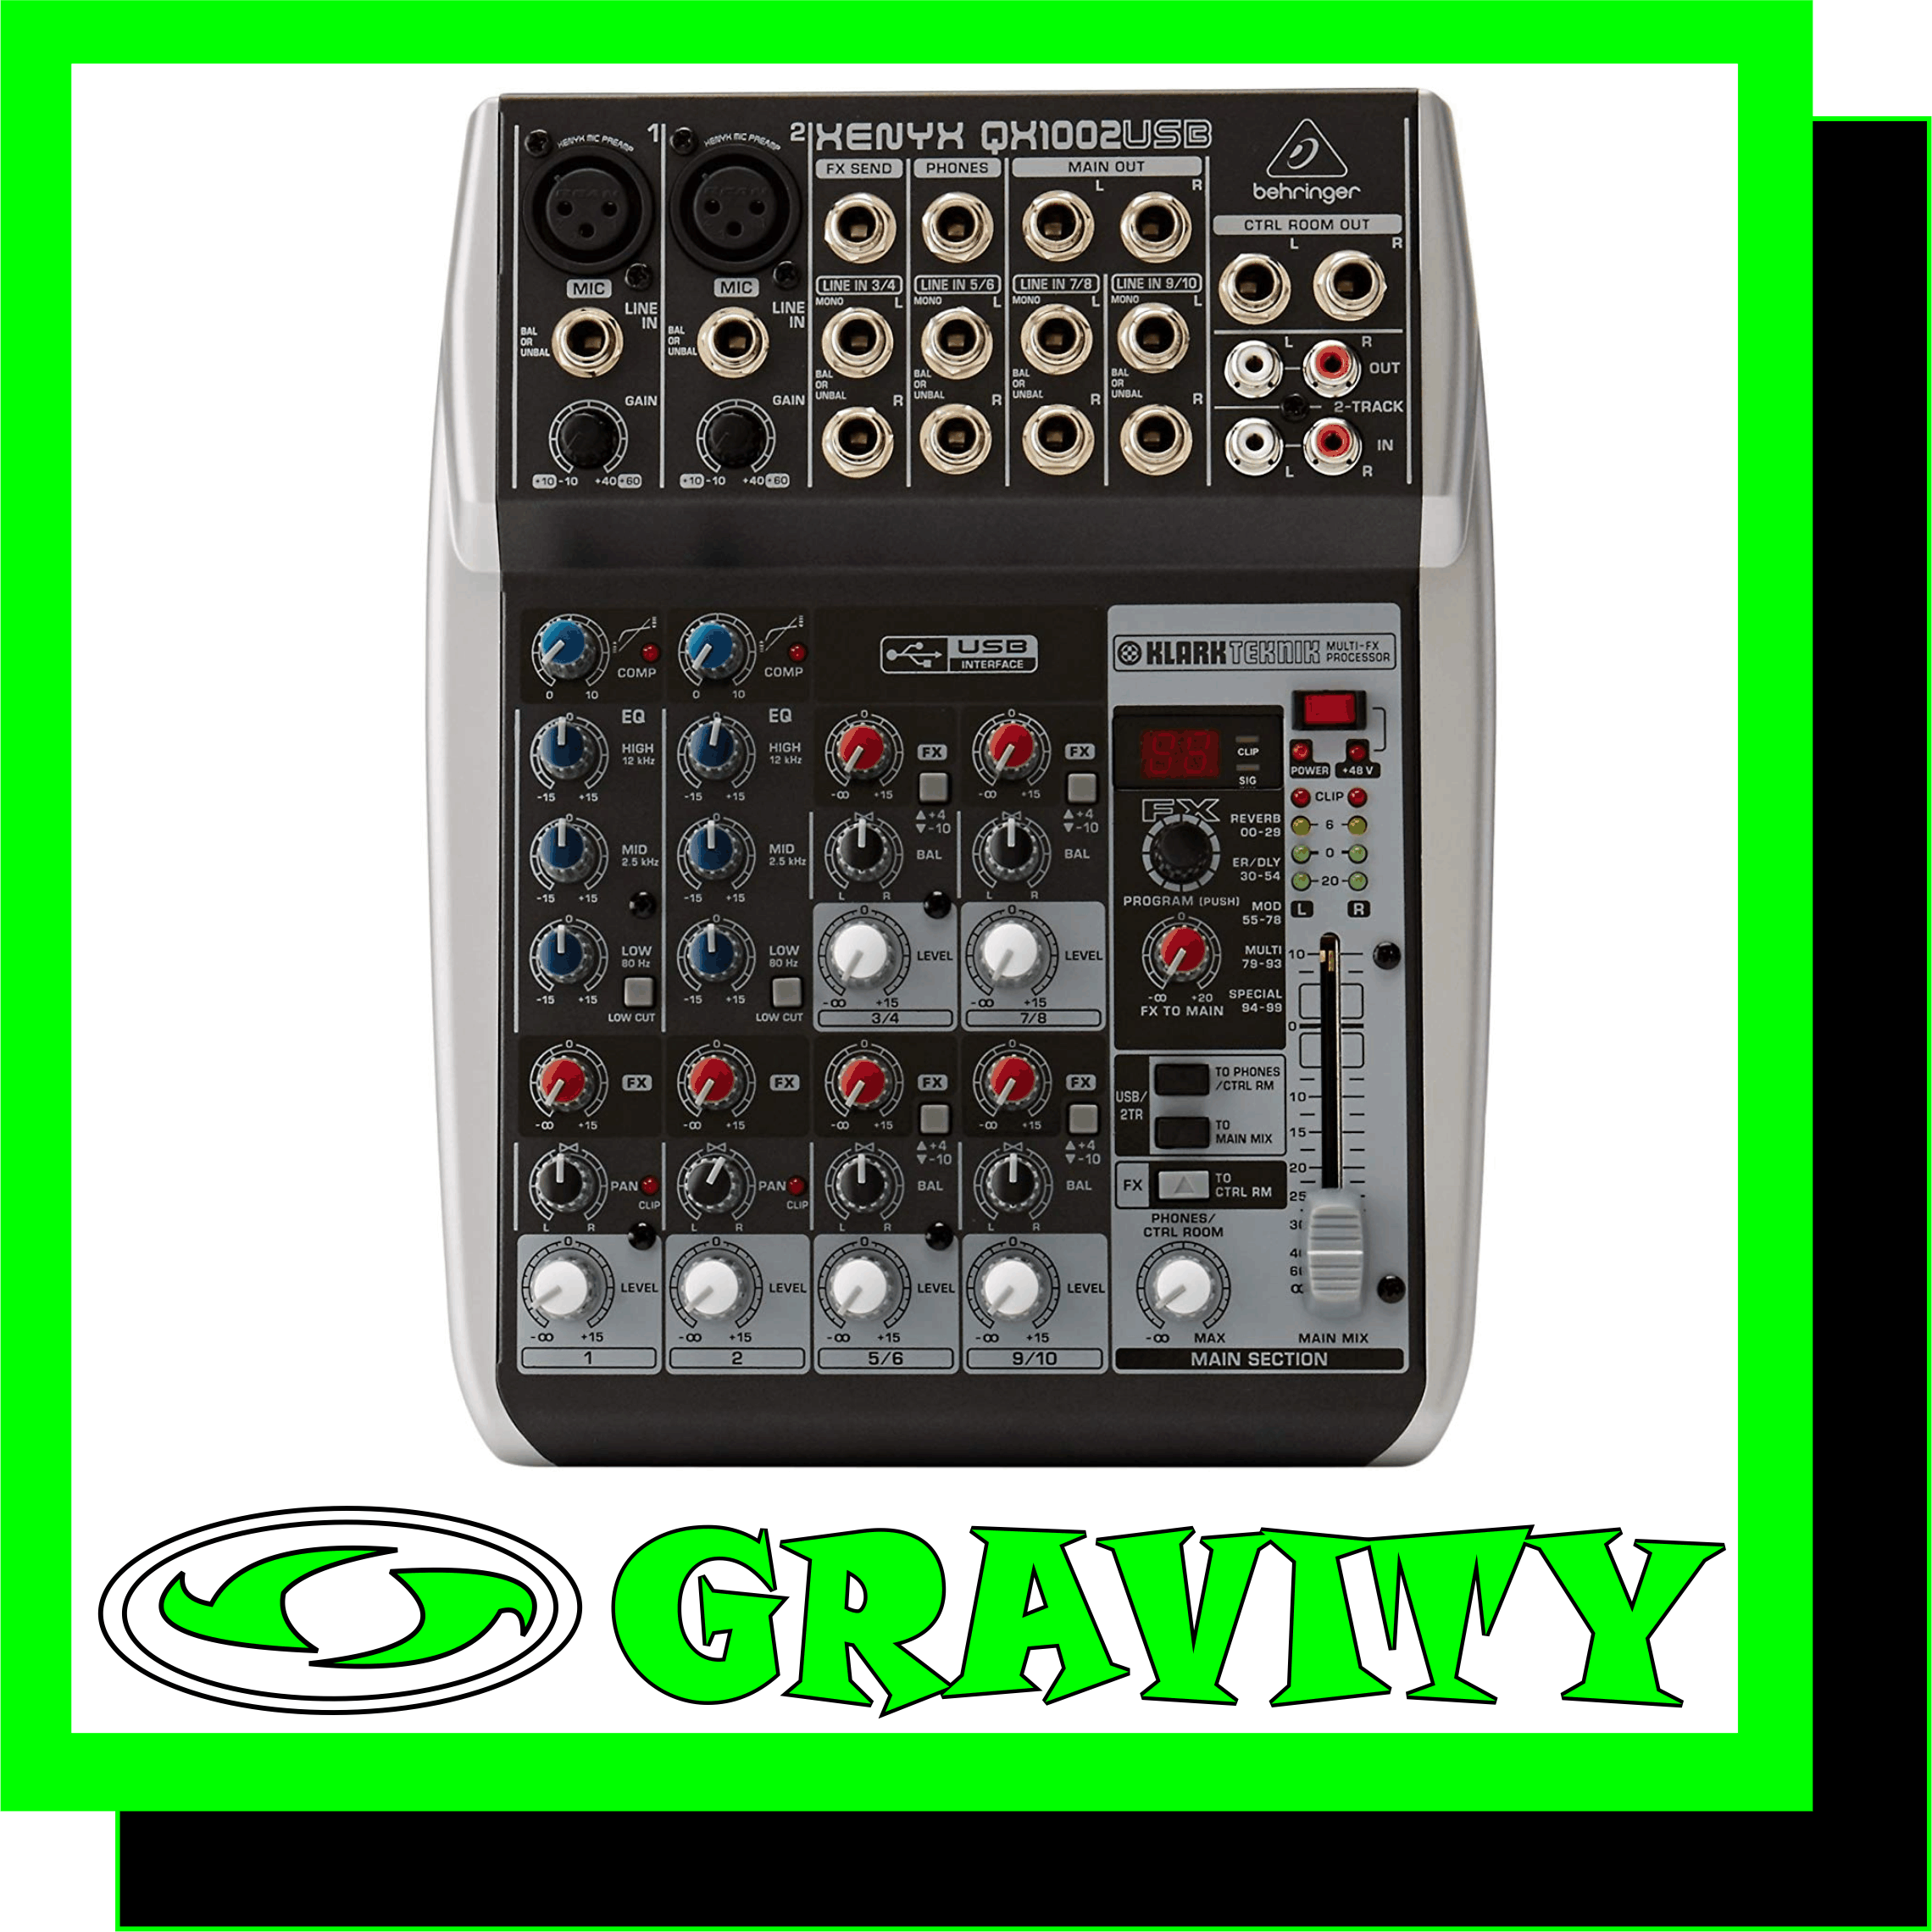 Behringer XENYX QX1002USB 10 input Mixer  Product Features: -Premium ultra-low noise, high headroom analog mixer -2 state-of-the-art XENYX Mic Preamps comparable to stand-alone boutique preamps -Studio-grade compressors with super-easy “one-knob” functionality and control -LED for professional vocal and instrumental sound -Ultra-high quality KLARK TEKNIK FX processor with 100 presets including reverb, -chorus, flanger, delay, pitch shifter and various multi-effects -Built-in stereo USB/Audio Interface to connect directly to your computer. Free -audio recording, editing and podcasting software plus 150 instrument/effect -plug-ins downloadable at behringer.com -Neo-classic “British” 3-band EQs for warm and musical sound -FX send control per channel for internal FX processor and/or as external send -Main mix outputs plus separate control room, phones and 2-Track outputs -2-Track inputs assignable to main mix or control room/phones outputs -High-quality components and exceptionally rugged construction ensure long life -Conceived and designed by BEHRINGER Germany  The compact QX1002USB mixer allows you to effortlessly achieve premium-quality sound, thanks to its 2 onboard studio-grade XENYX Mic Preamps and ultra-musical British channel EQs. And our easy-to-use one-knob compressors provide total dynamic control for the ultimate in punch and clarity, while respecting all the power and emotion you pack into every note. Add to this, the sweet forgiveness of our British-style EQs and a KLARK TEKNIK 24-Bit Multi-FX Processor with 100 presets including studio-class reverbs, delays, pitch shifter and various multi-effects and the QX1002USB becomes an incredibly versatile mixer for your live performances. But the XENYX QX1002USB isnt just designed to handle your live gigs; it also provides the state-of-the-art tools you need to make stunning, professional-quality recordings. Along with the built-in USB/audio interface, the QX1002USB comes with all the recording and editing software needed to turn your computer system into your own personal, high-performance home recording studio. BUY ONLINE AUDIO MART BID OR BUY